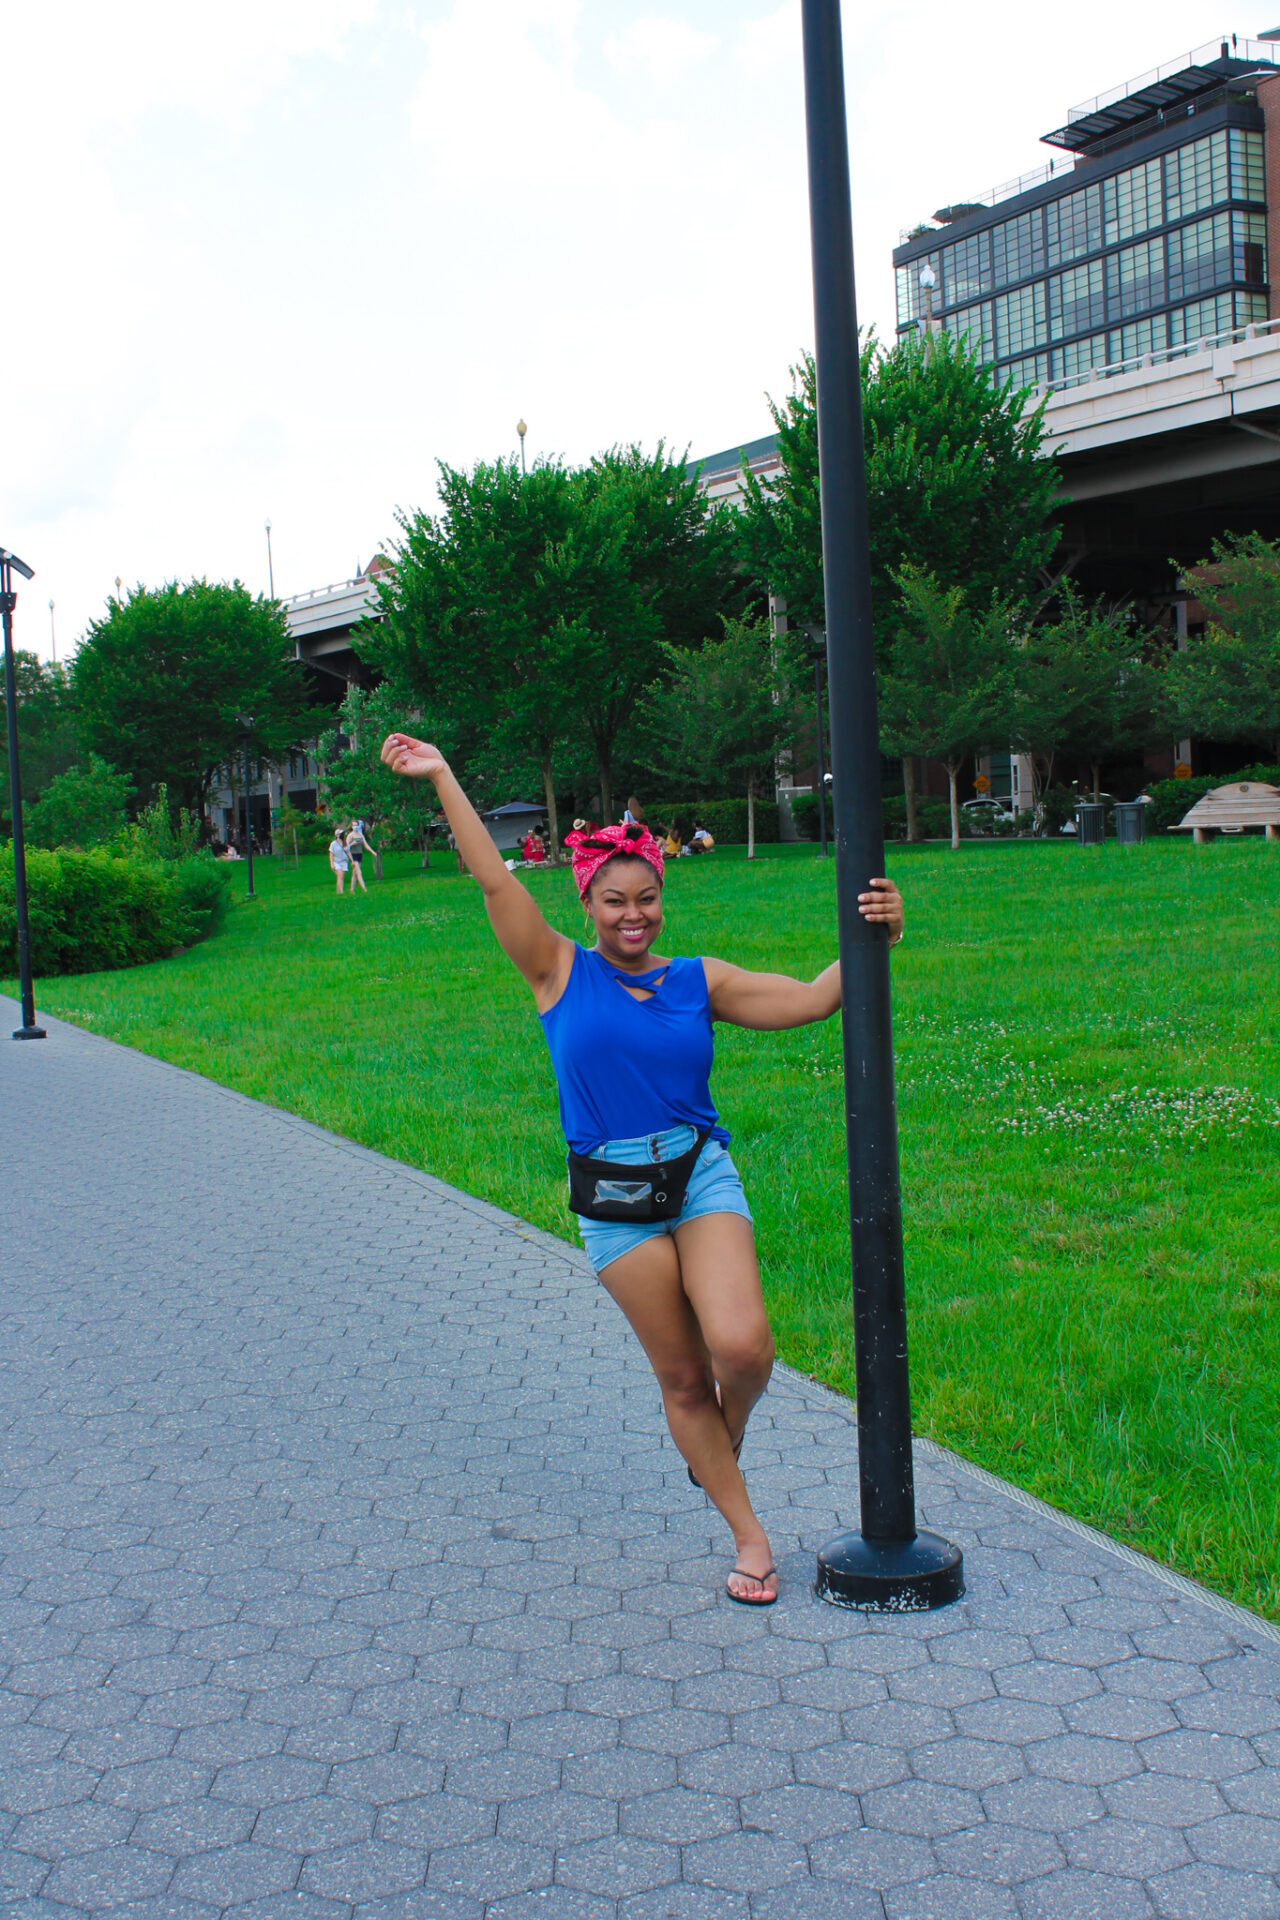 DC blogger, Rogan Smith of This Bahamian Gyal, swings on a pole in Georgetown, DC.